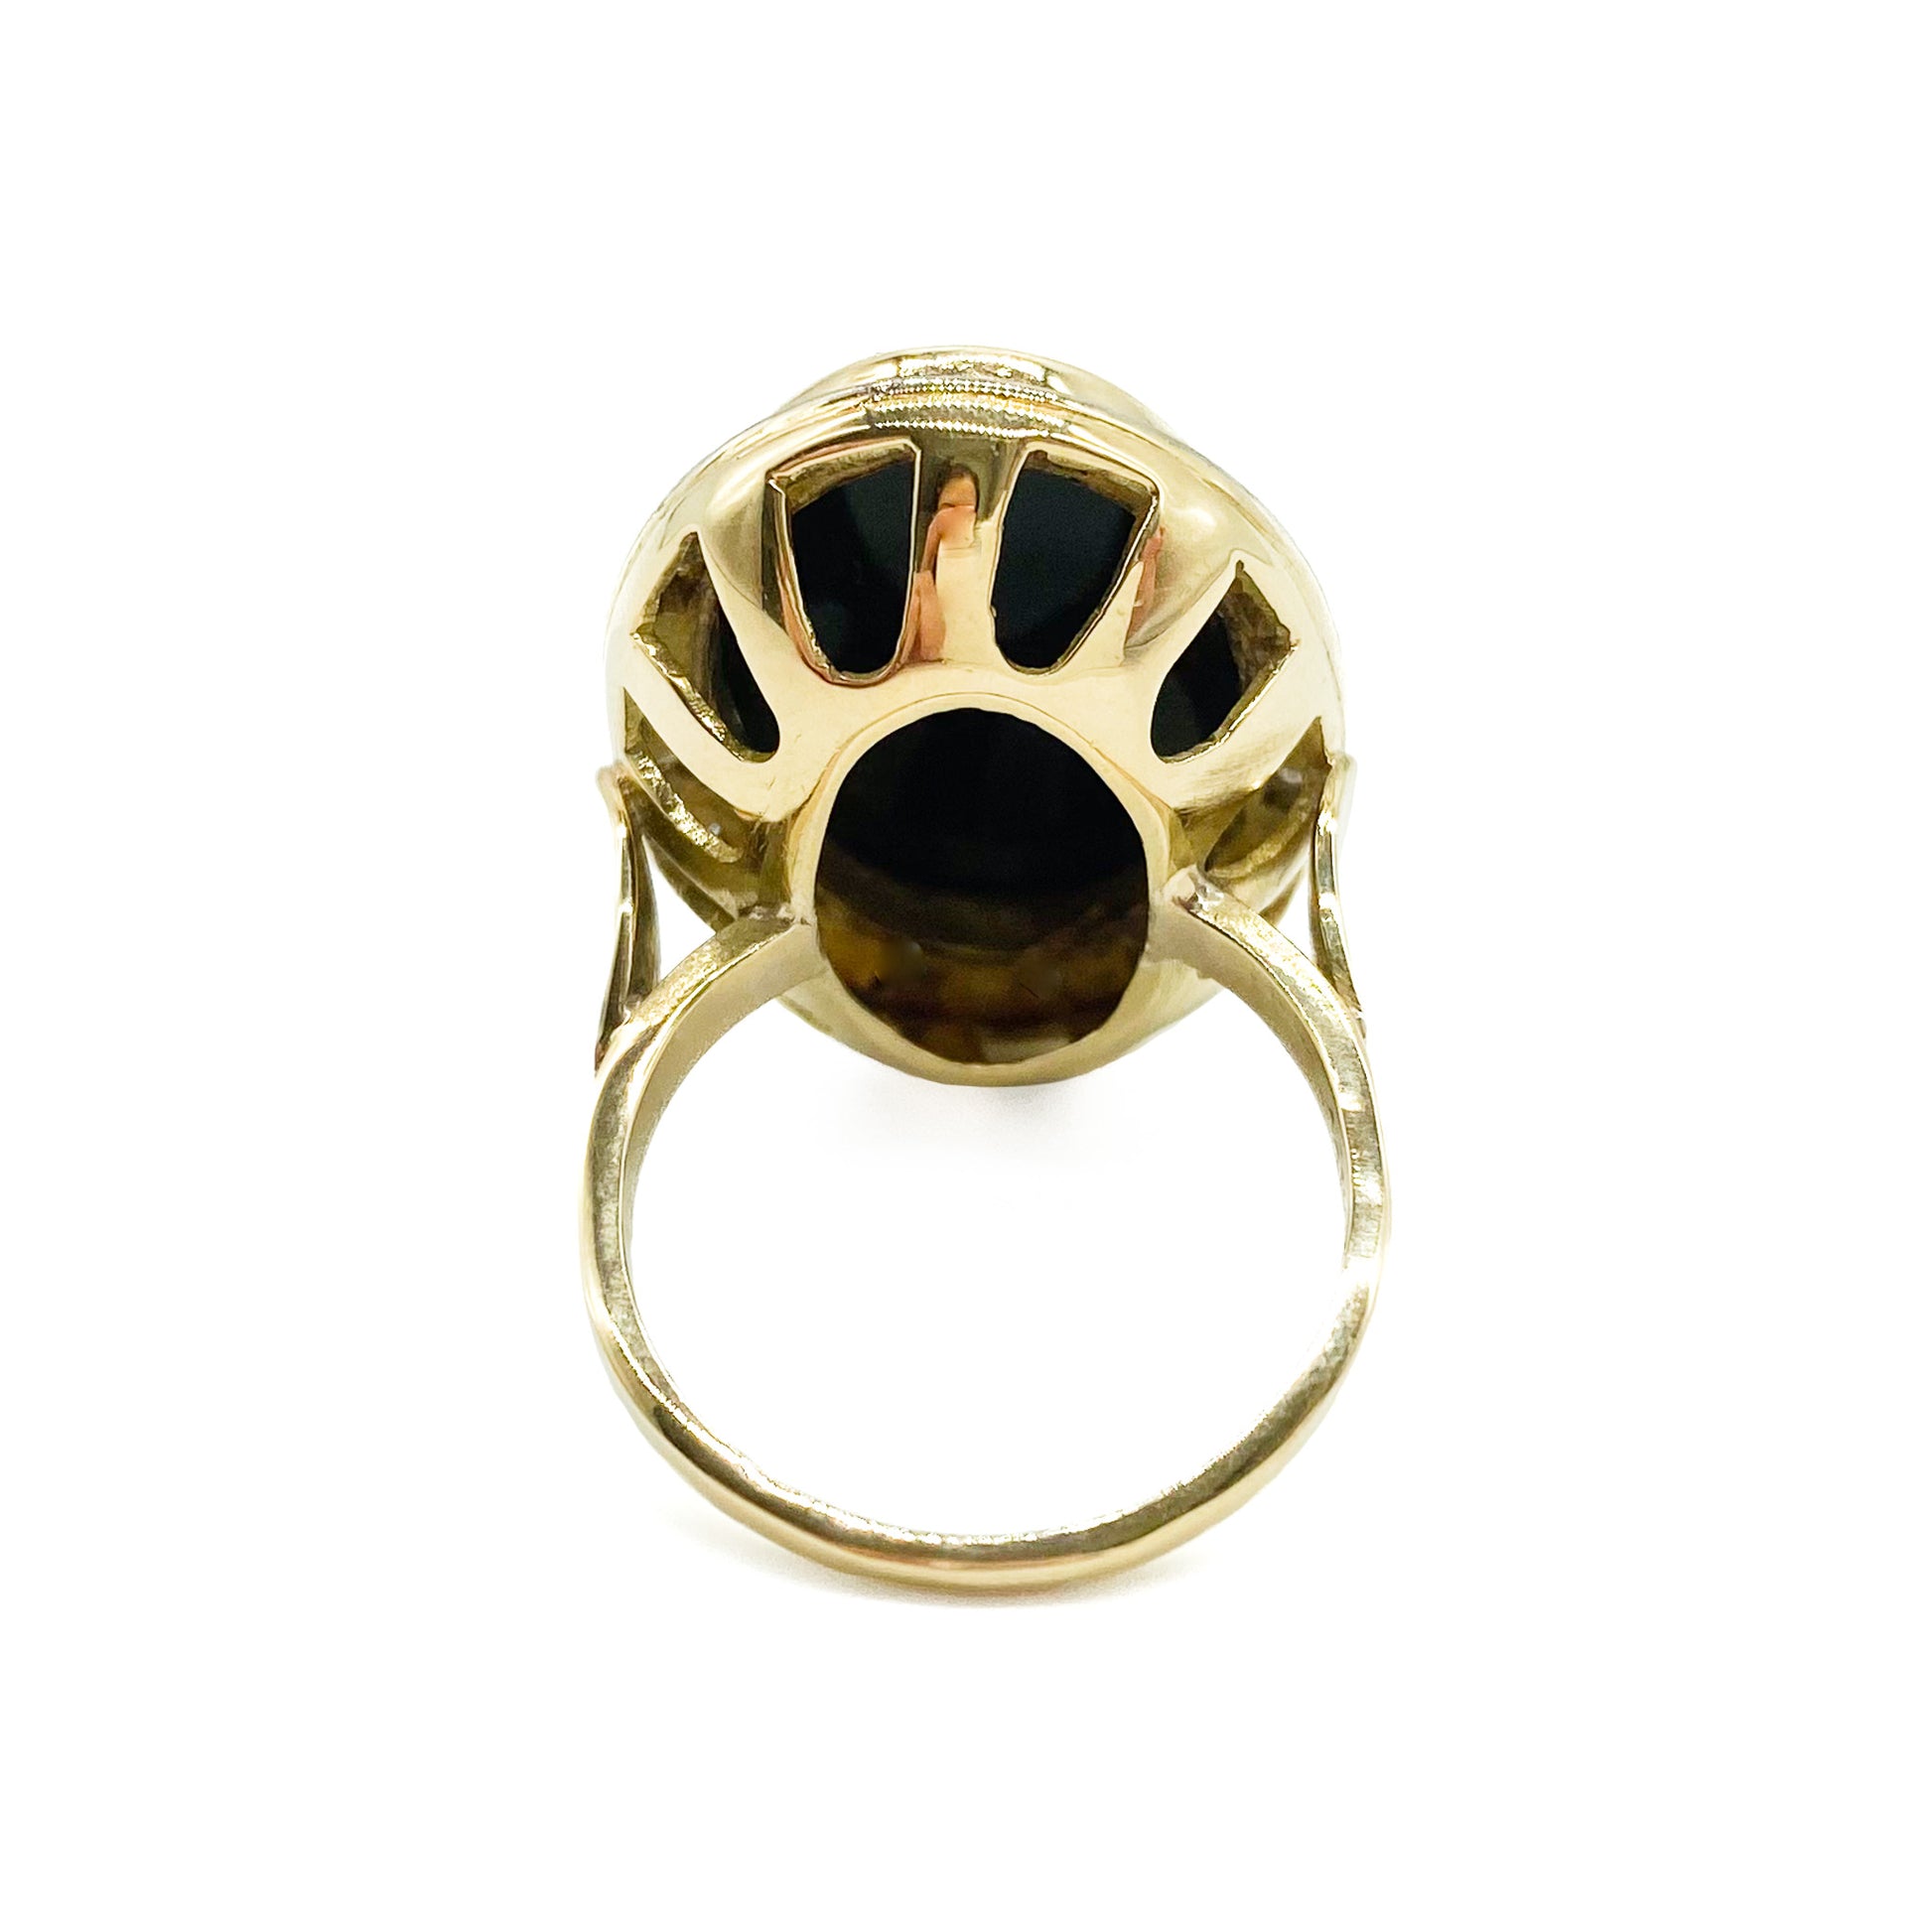 Magnificent vintage 18ct gold ring set with sixteen small diamonds and an oval cabochon onyx stone. Argentina